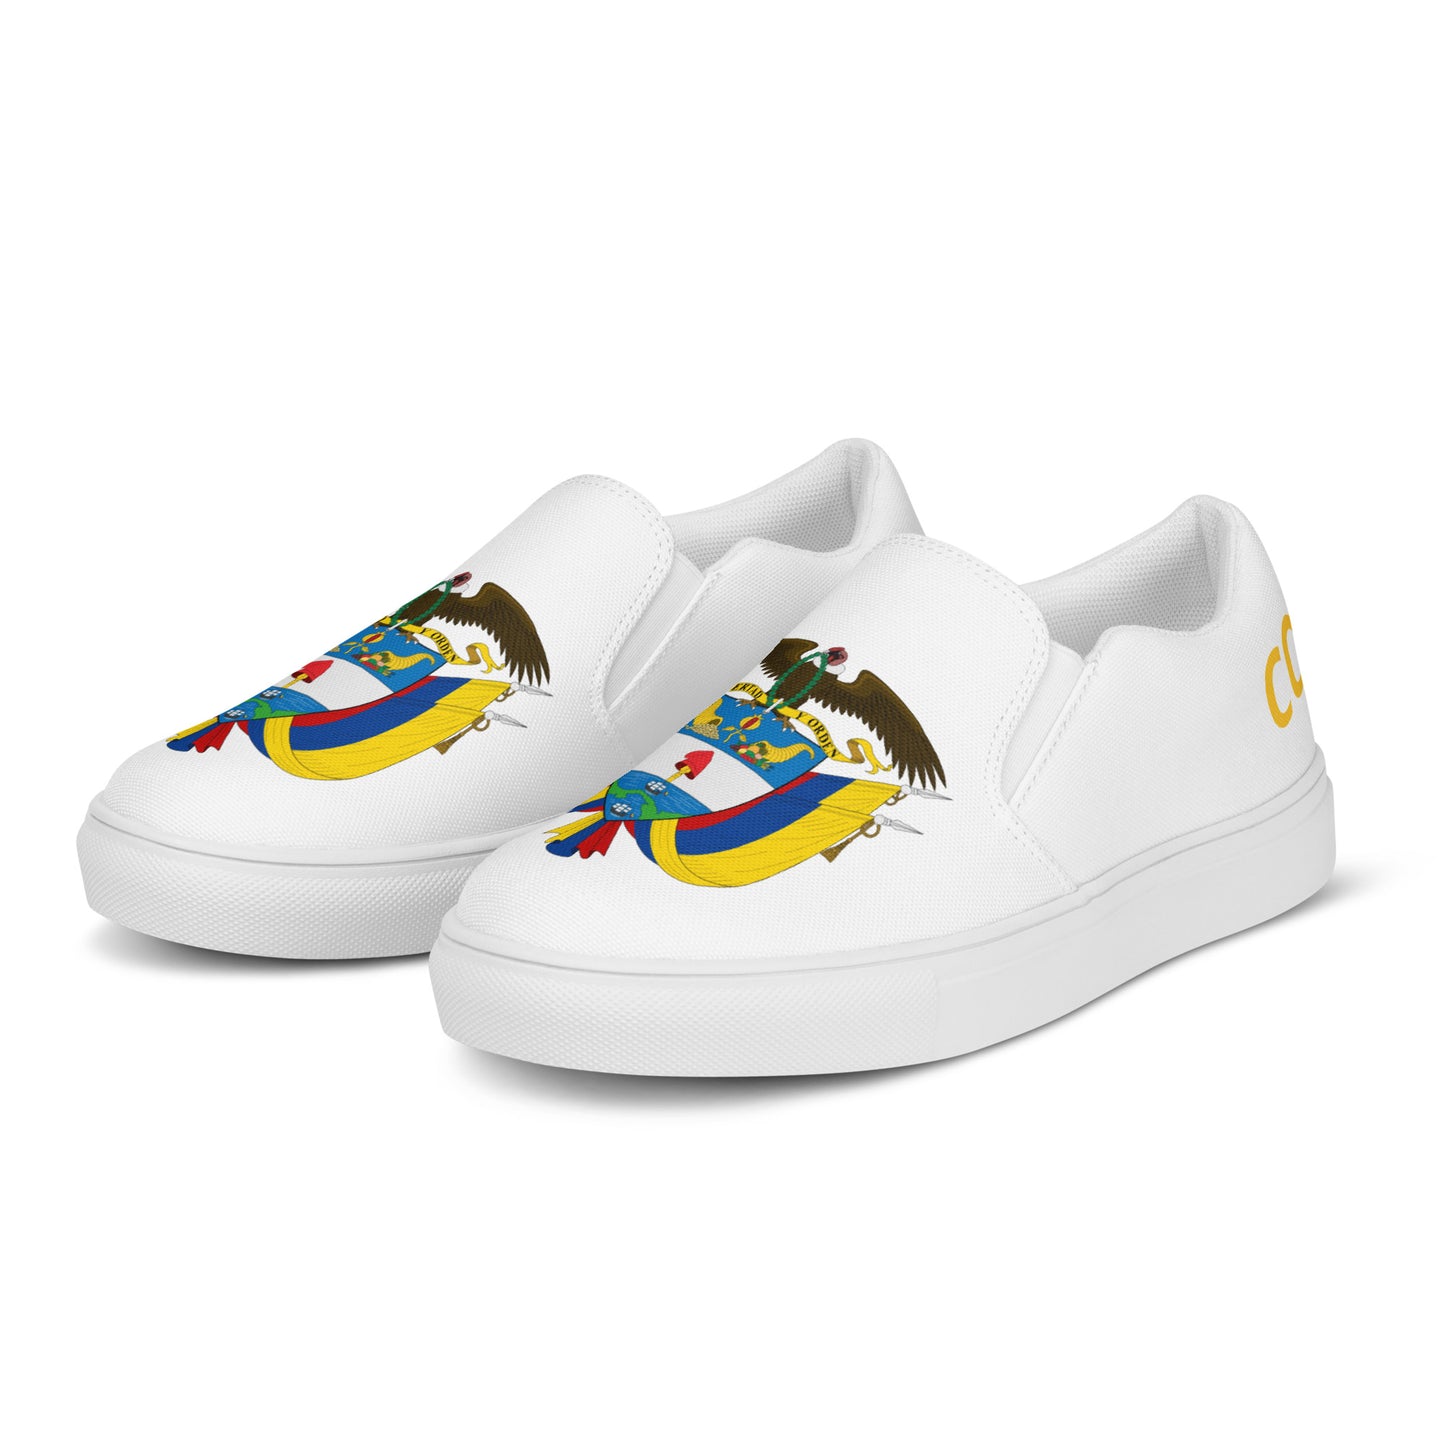 Colombia - Men - White - Slip-on shoes